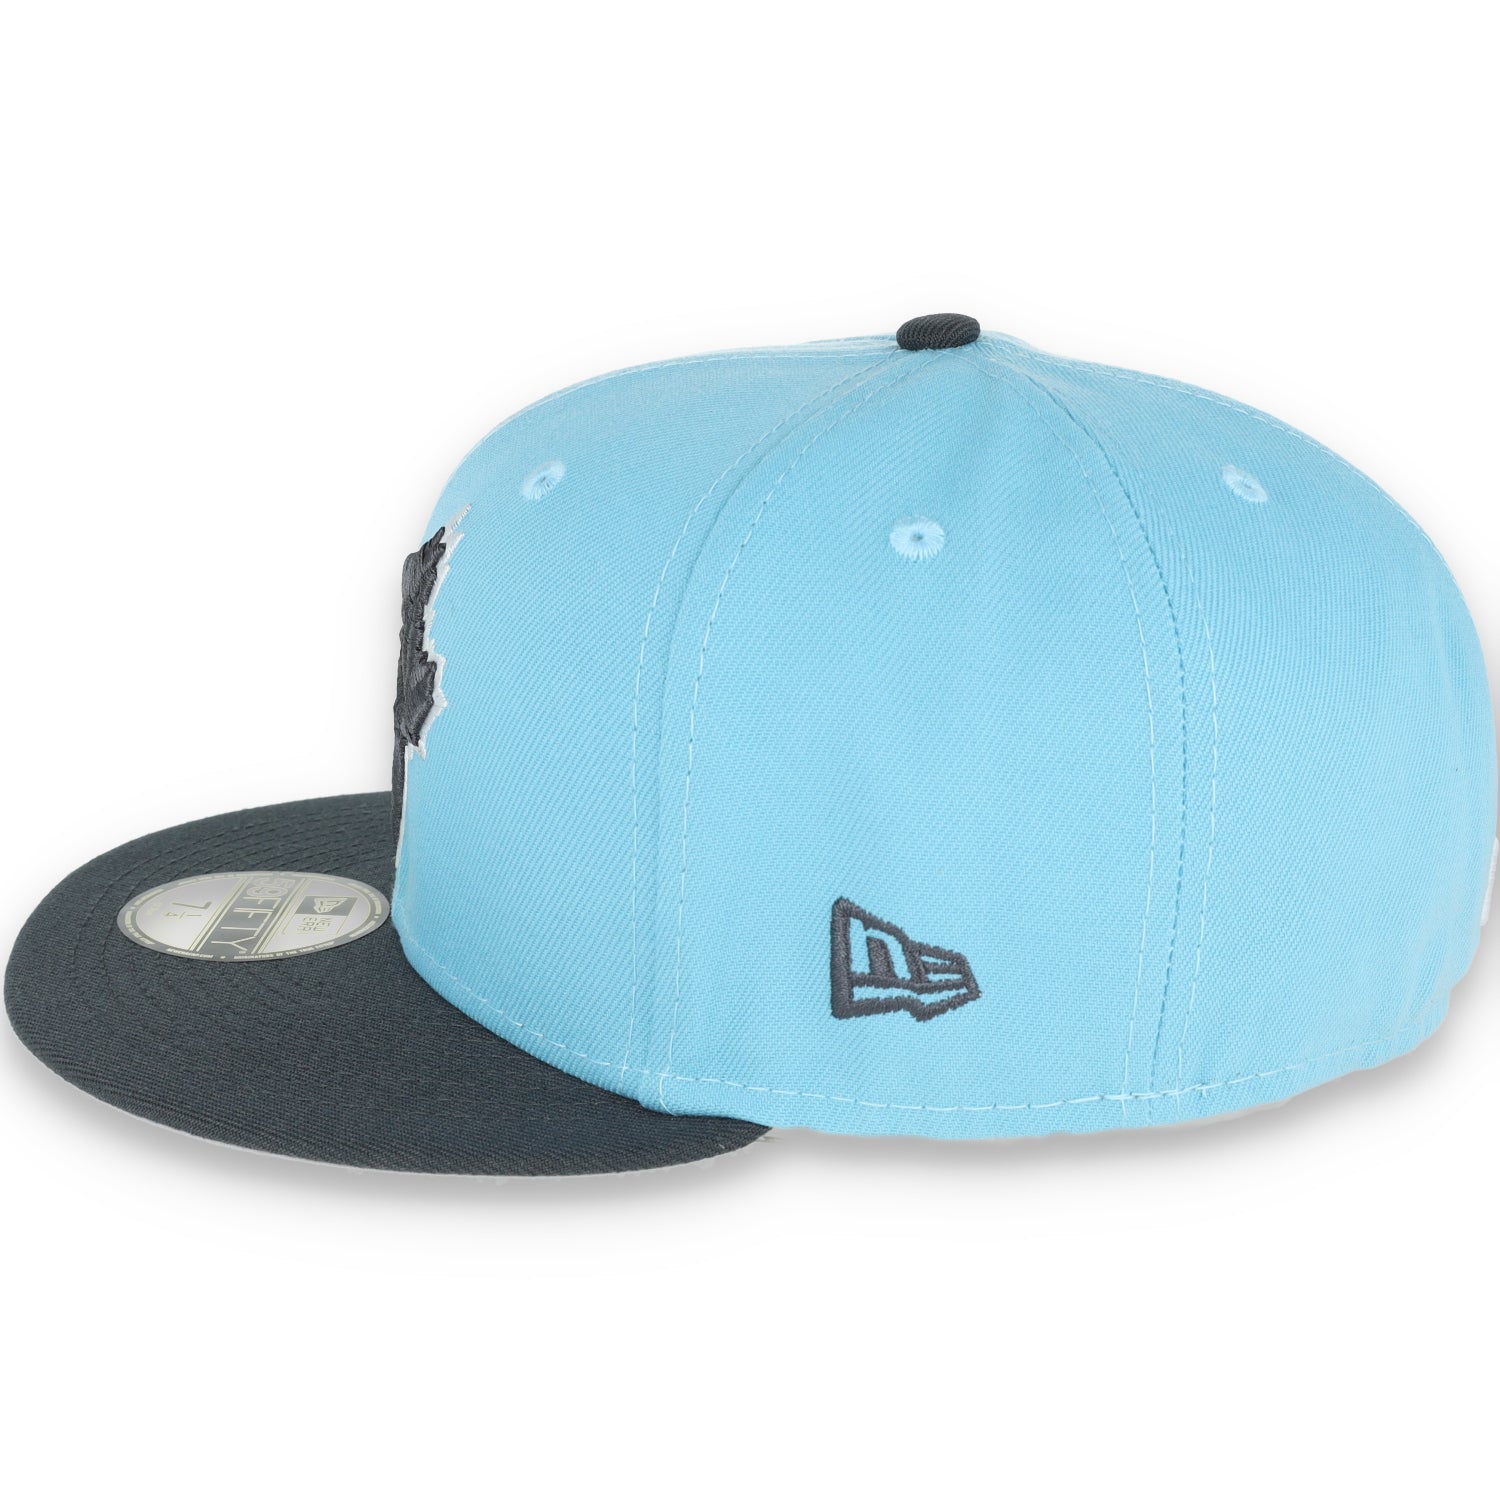 NEW ERA TORONTO BLUE JAYS 59FIFTY COLOR PACK-BABY BLUE/GREY